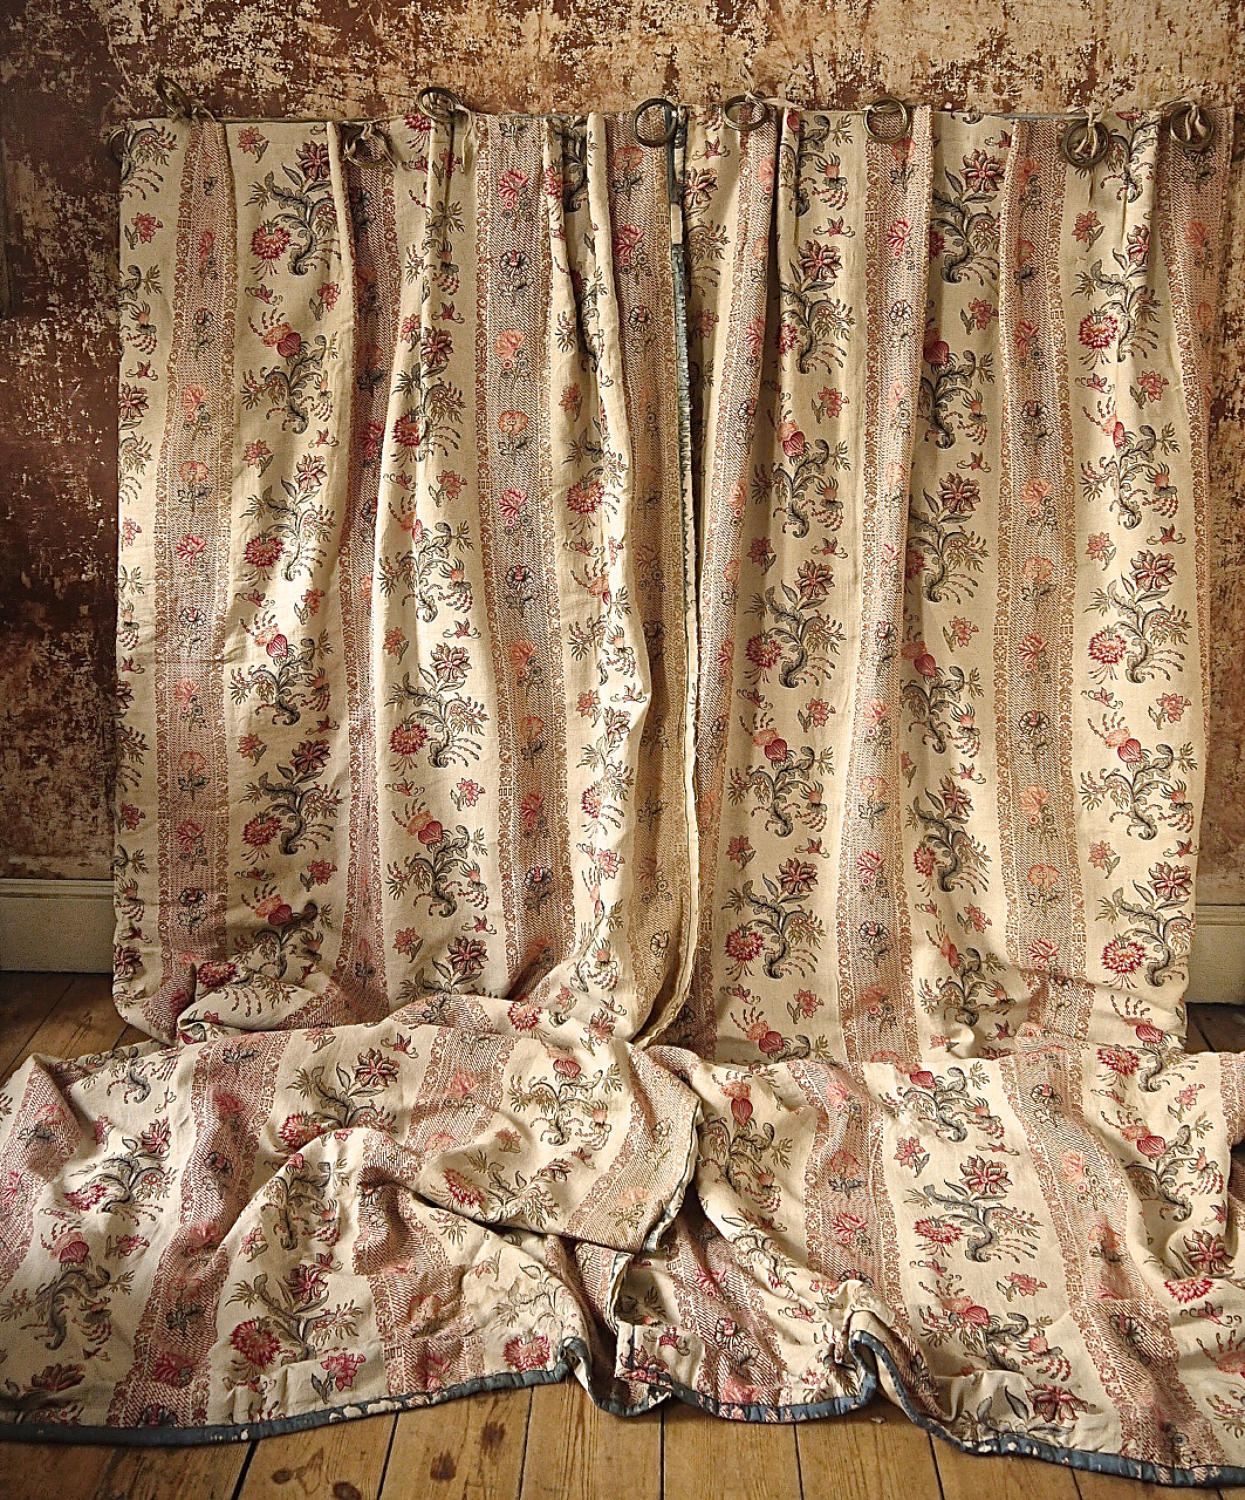 Pair of Floral Indienne Linen curtains French c.1880s